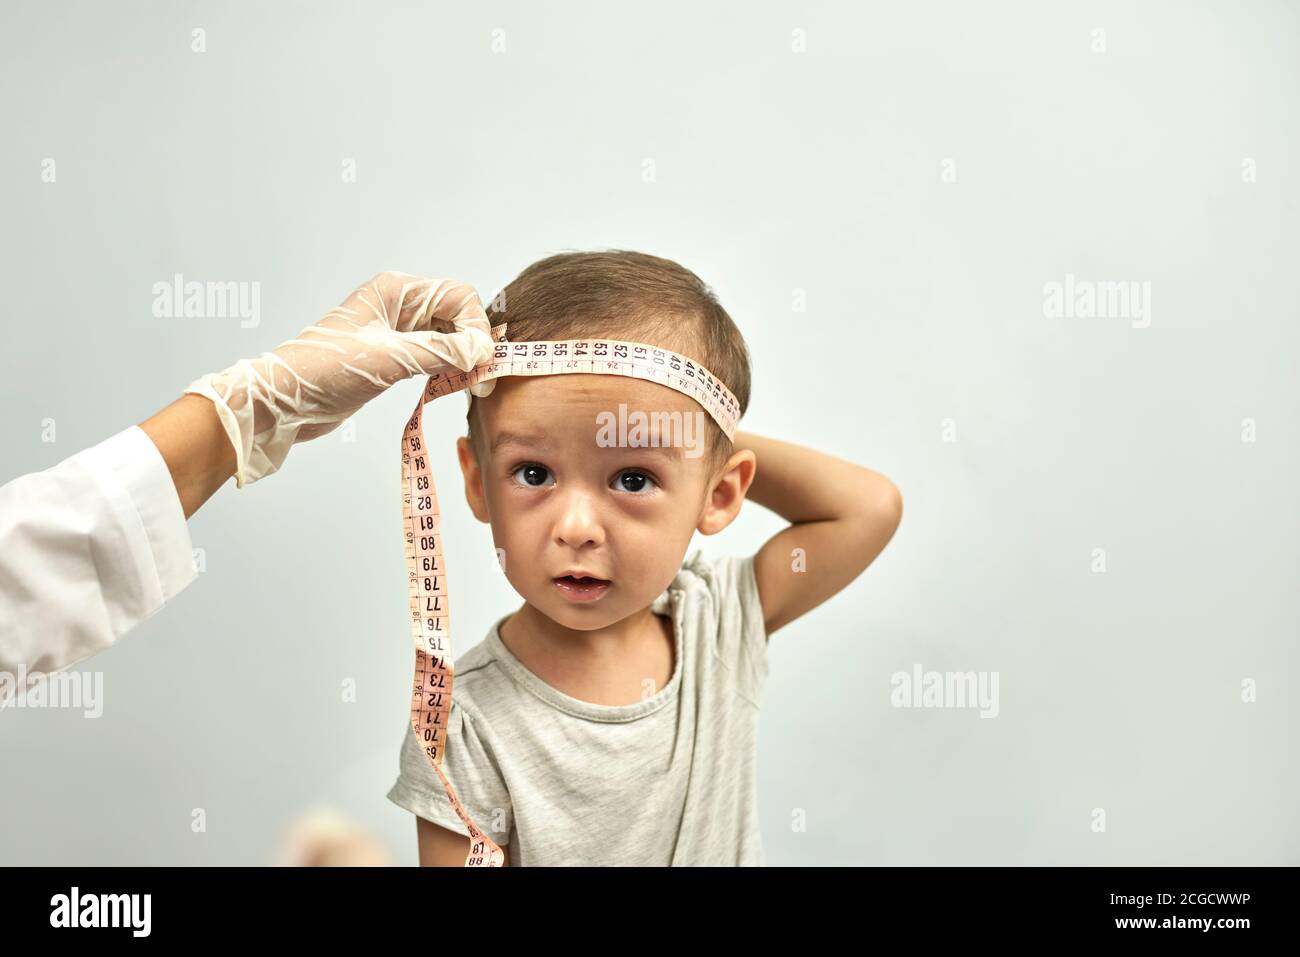 https://c8.alamy.com/comp/2CGCWWP/doctor-measuring-baby-head-circumference-pediatrician-place-measuring-tape-around-your-baby-head-and-record-its-size-well-baby-exam-regularly-2CGCWWP.jpg